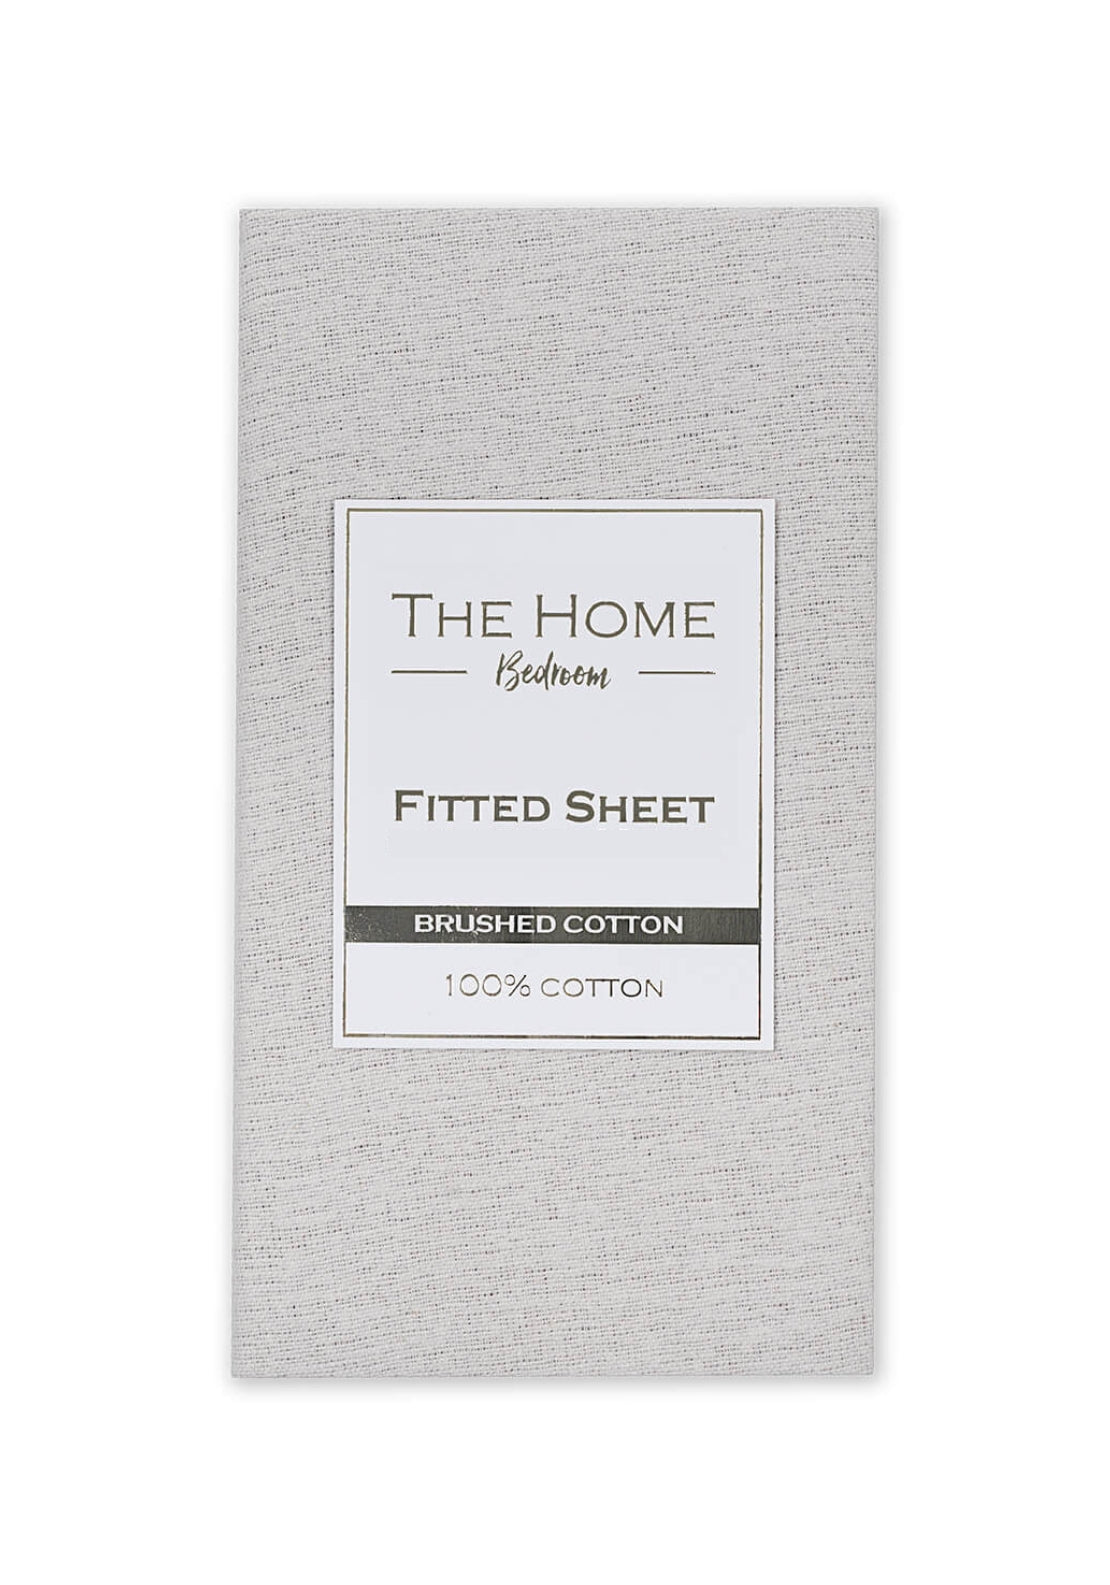 The Home Bedroom Brushed 100% Cotton Fitted Sheet - Grey 1 Shaws Department Stores